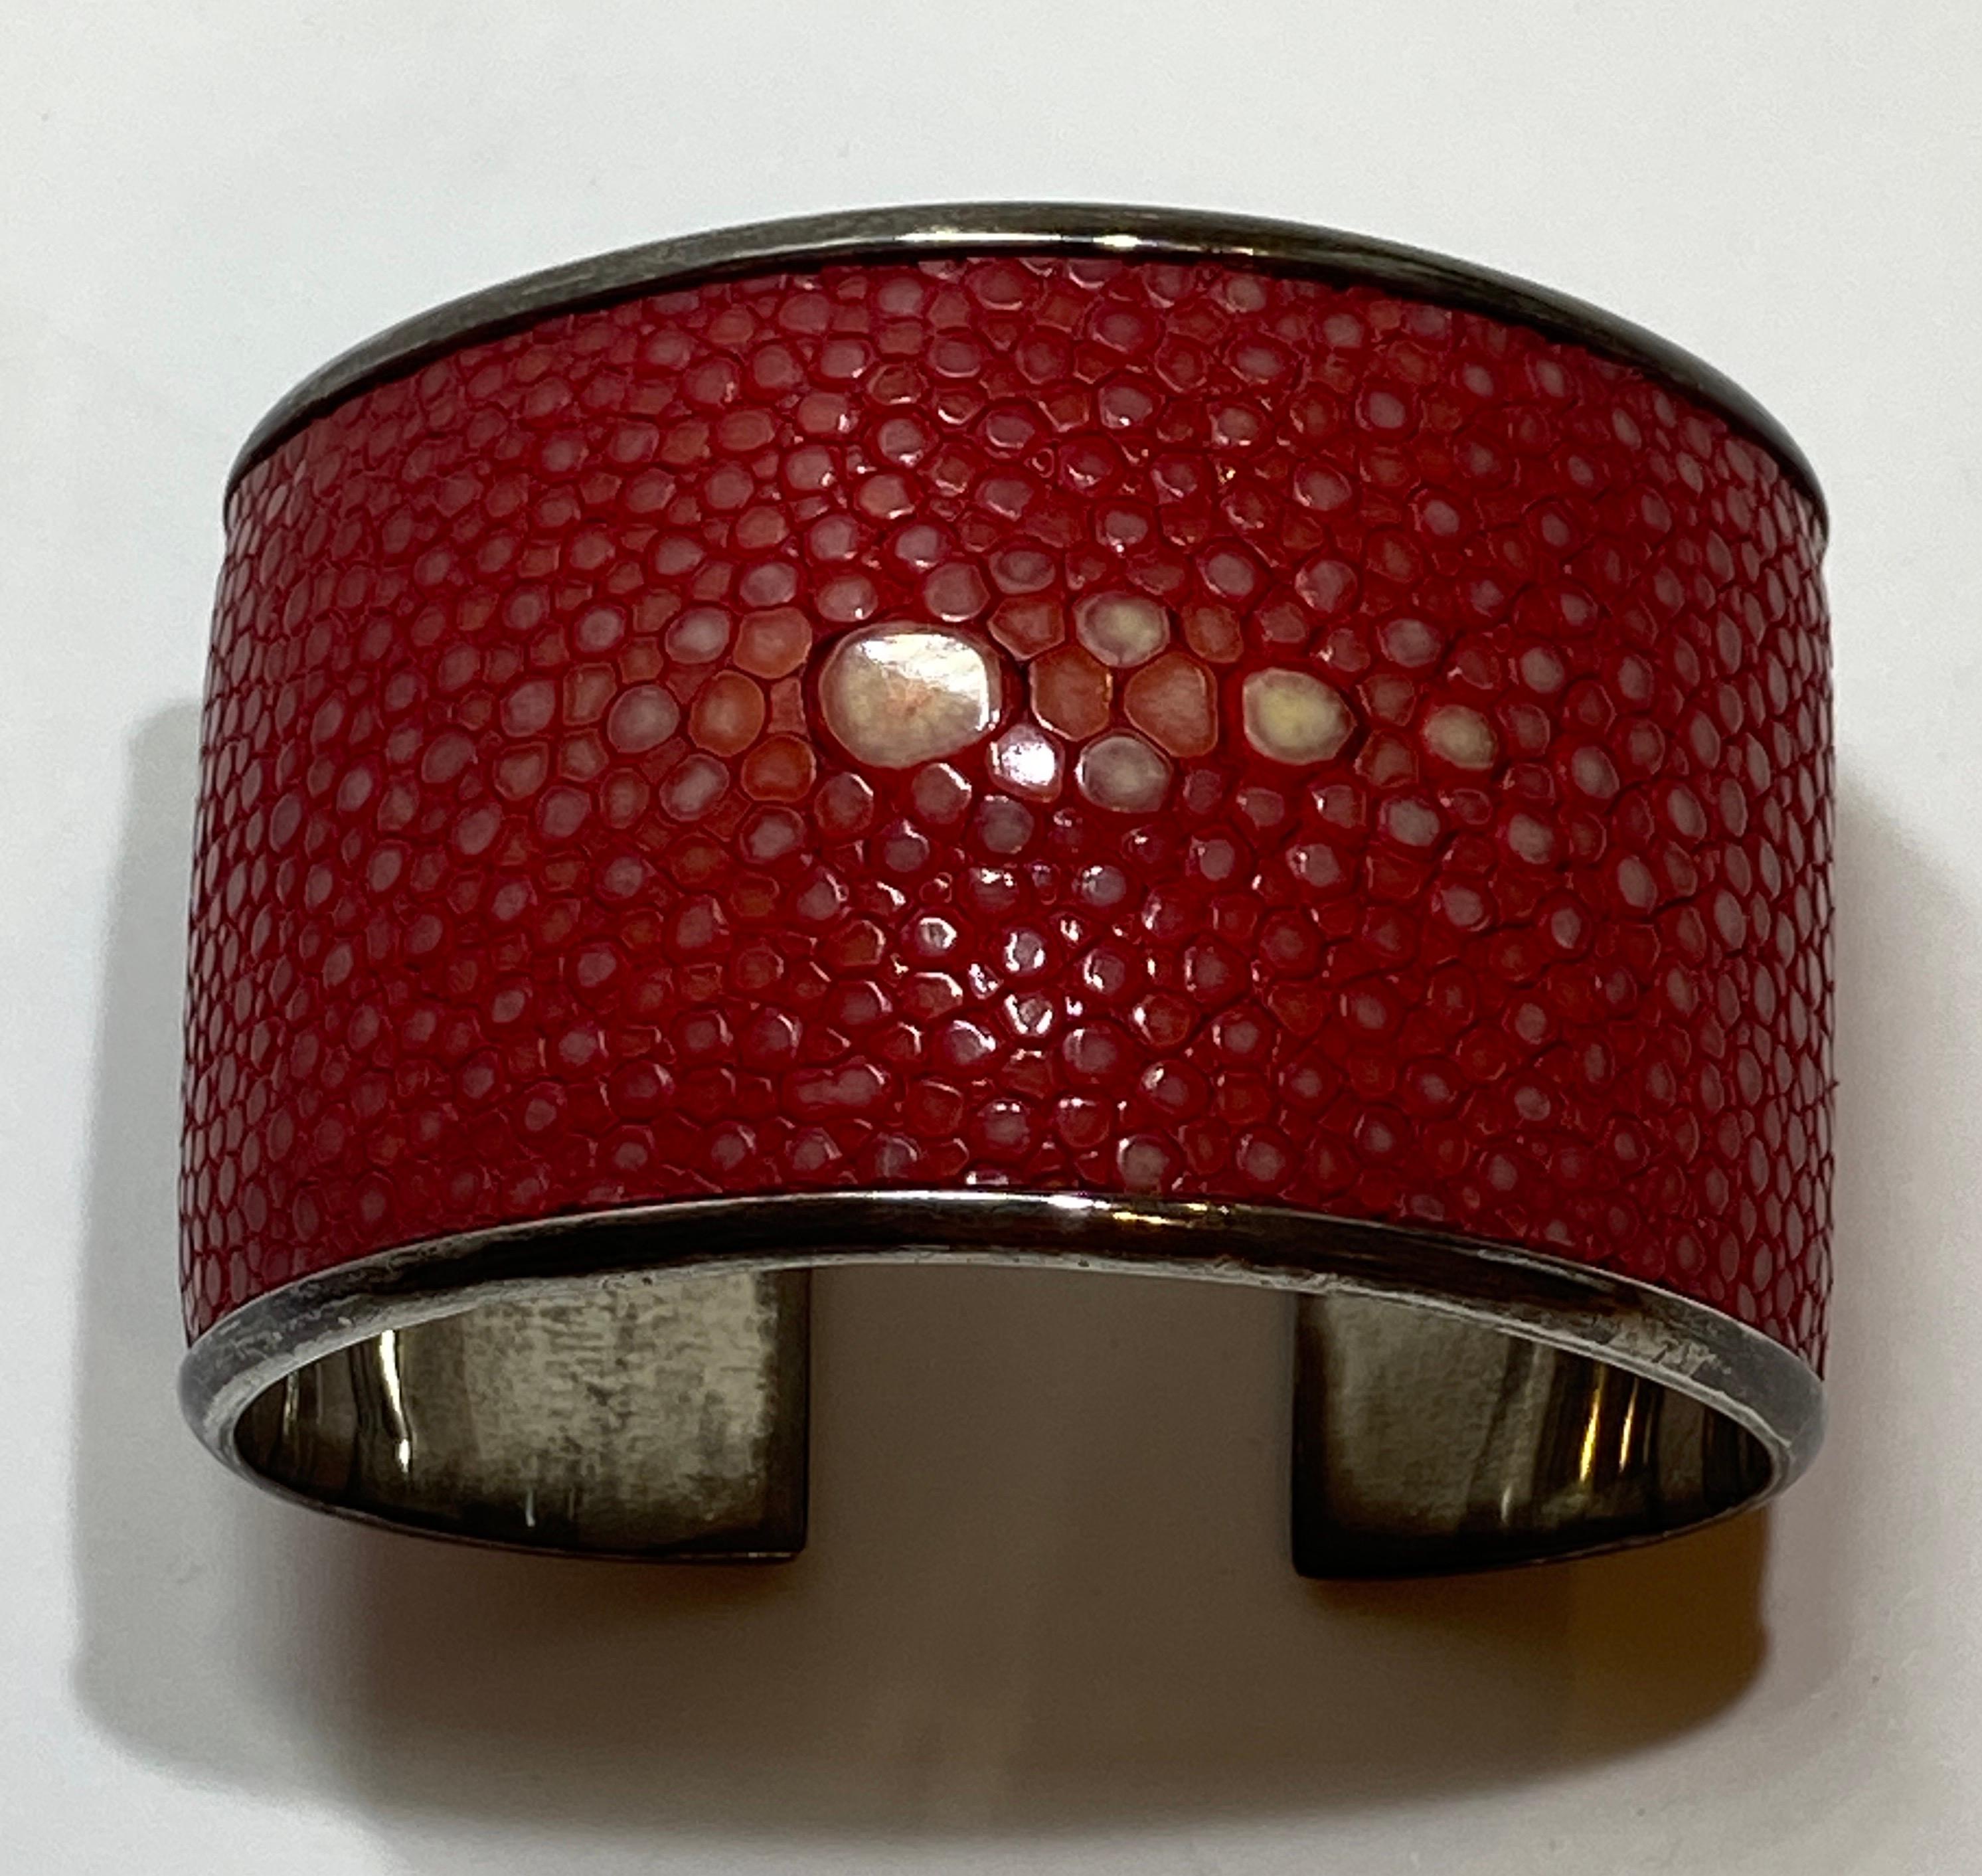 This wonderful bold statement sterling-silver cuff iis accented with shades of reds and creams dyed stingray skin. The interior is marked 